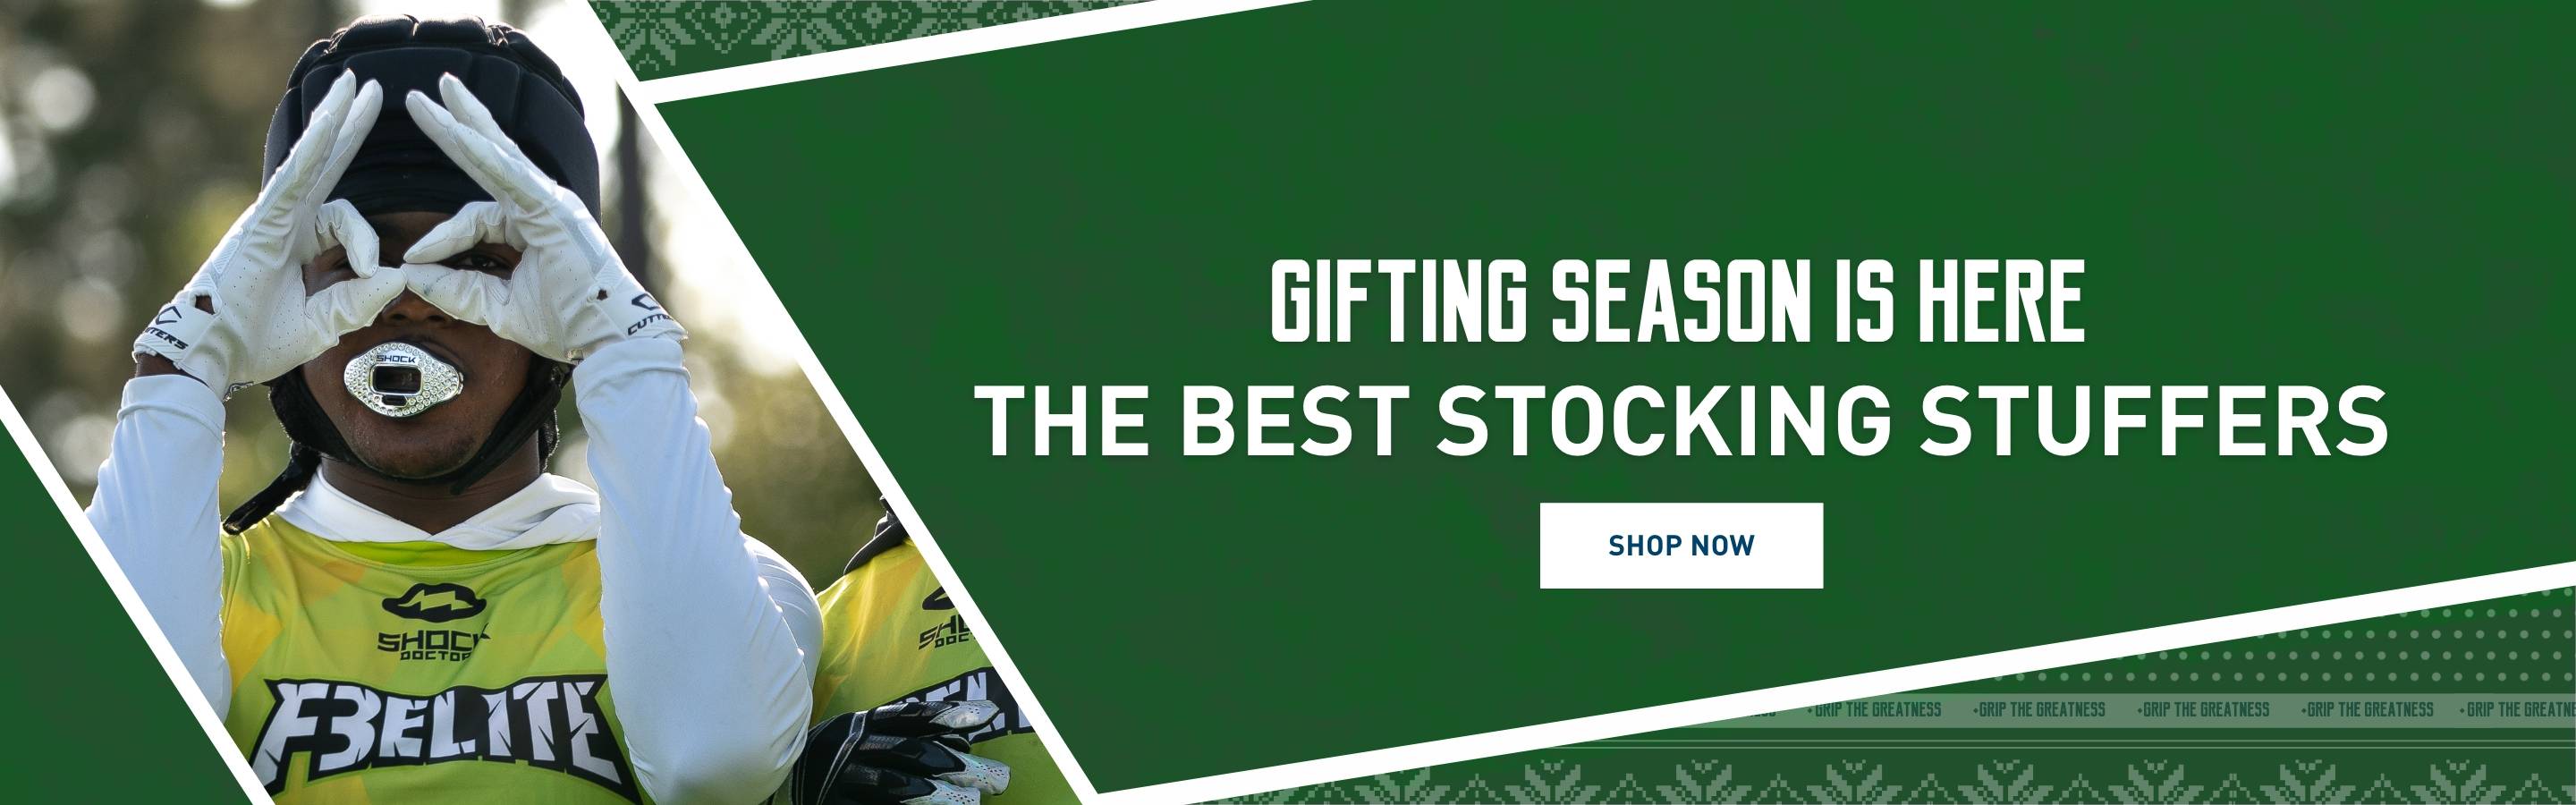 Gifting Season is Here. The Best Stocking Stuffers. Shop Now.